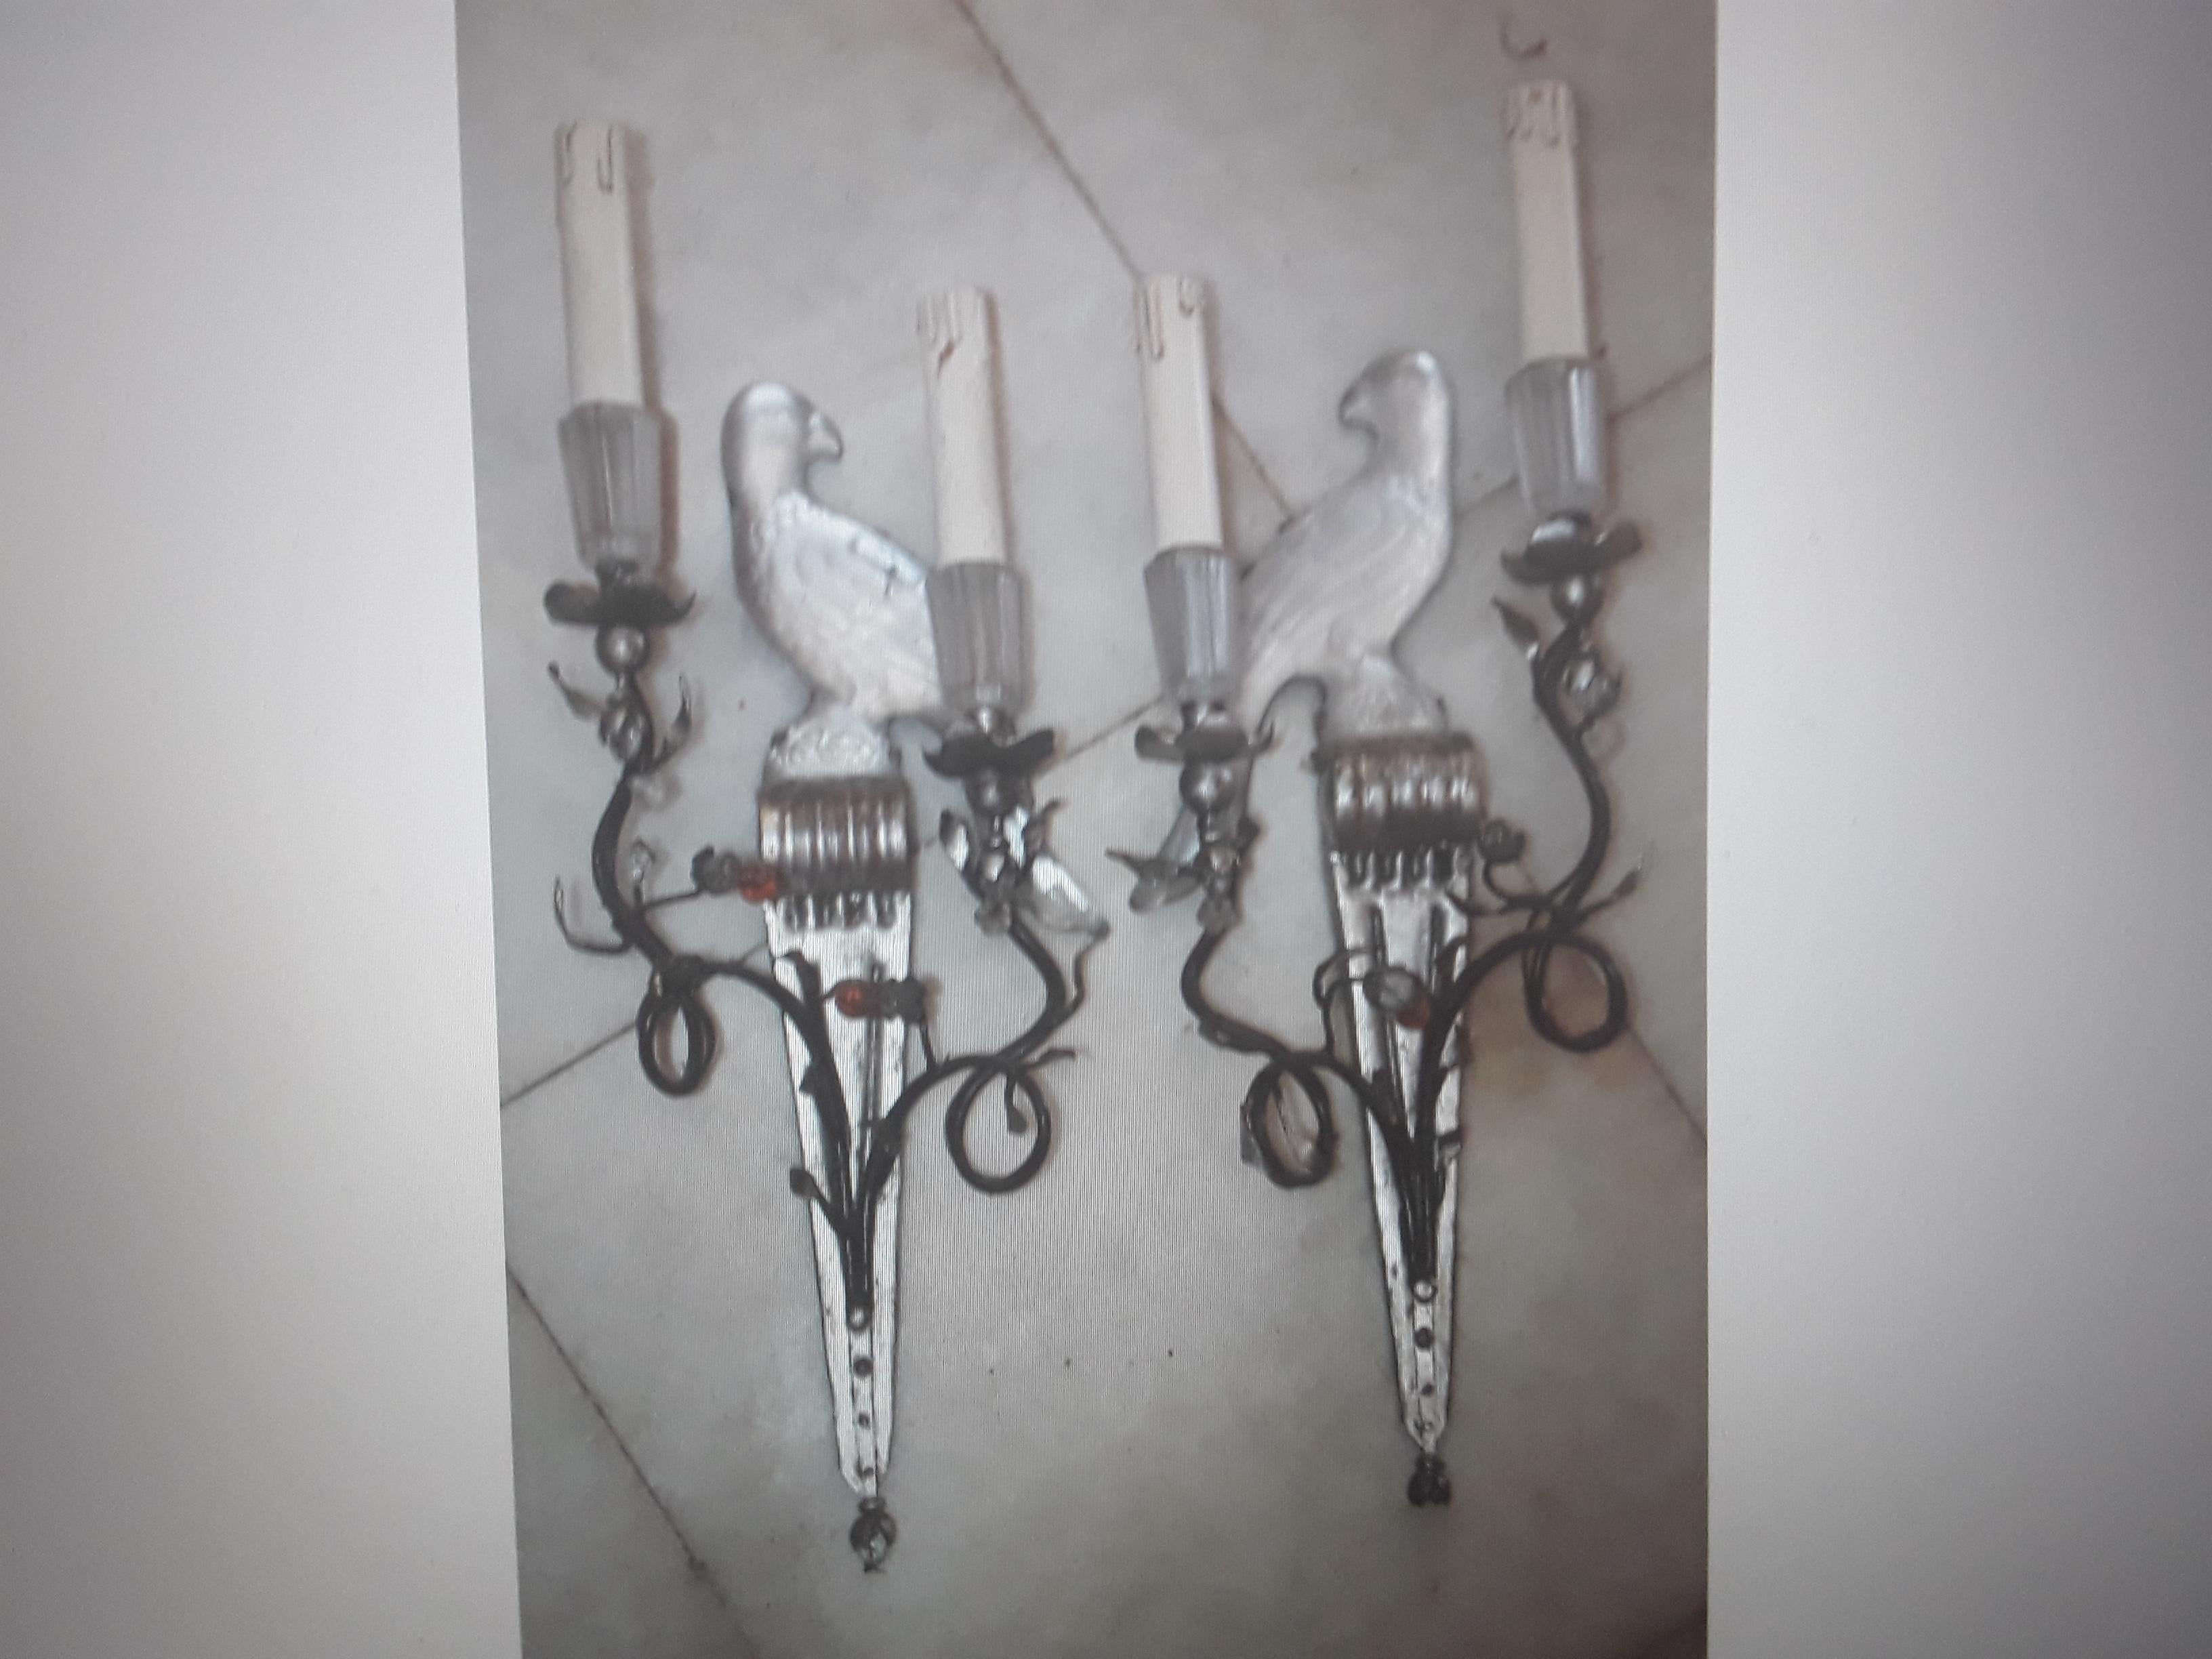 Pair French Hollywood Regency Frosted Crystal Parrot / Bird Wall Sconces by Maison Bagues Paris. One bird faces left and one bird fasinf left. Bronze metalwork.